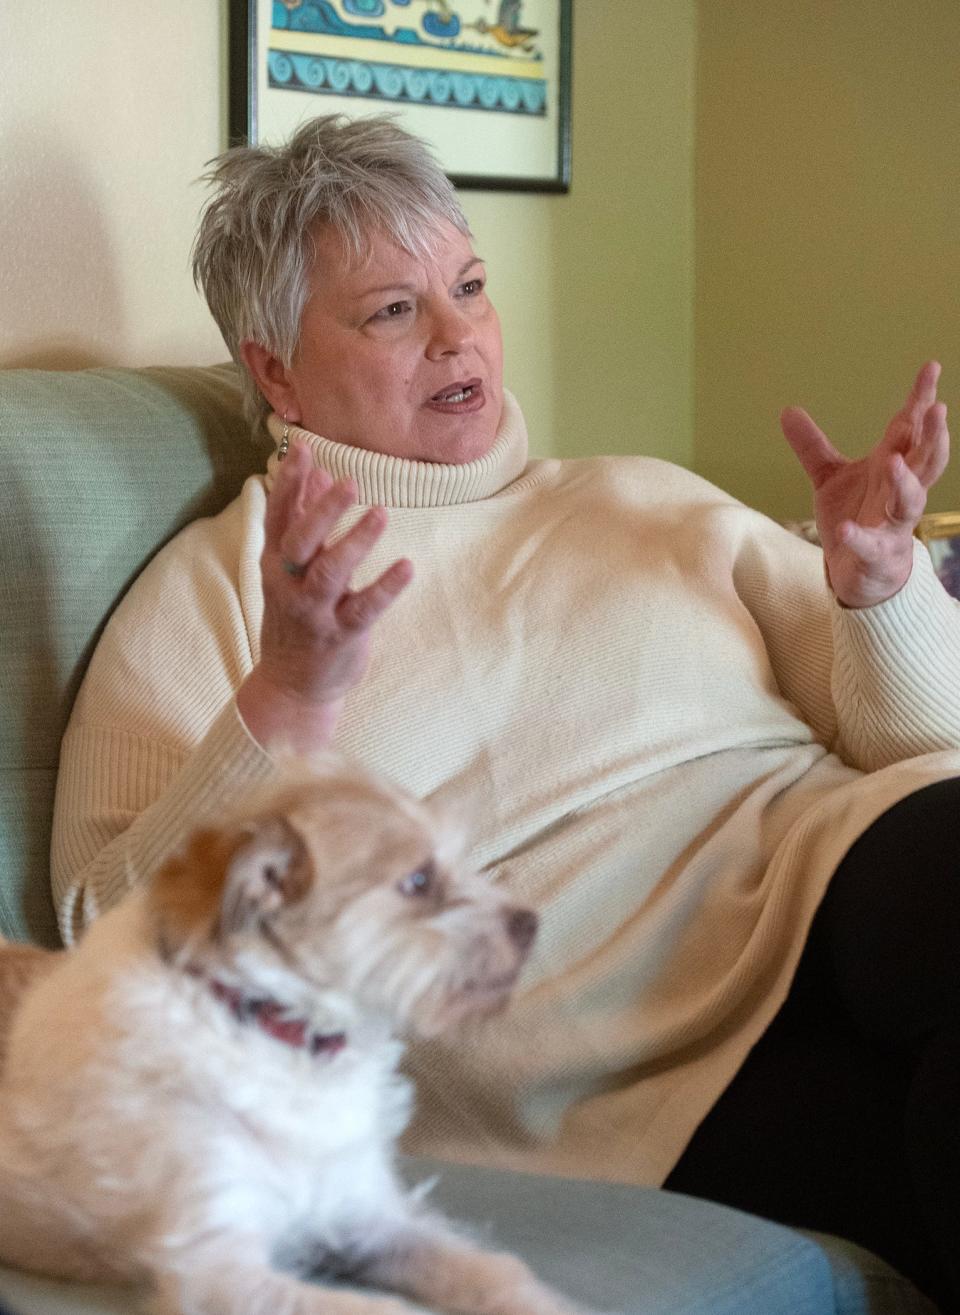 LGBTQ+ advocate Kathy Garner, in the Hattiesburg home she shares with her wife, the Rev. Susan Hrostowski, speaks about their life together, their legal battles, and why they have chosen to stay in Mississippi, Thursday, Nov. 29, 2023.